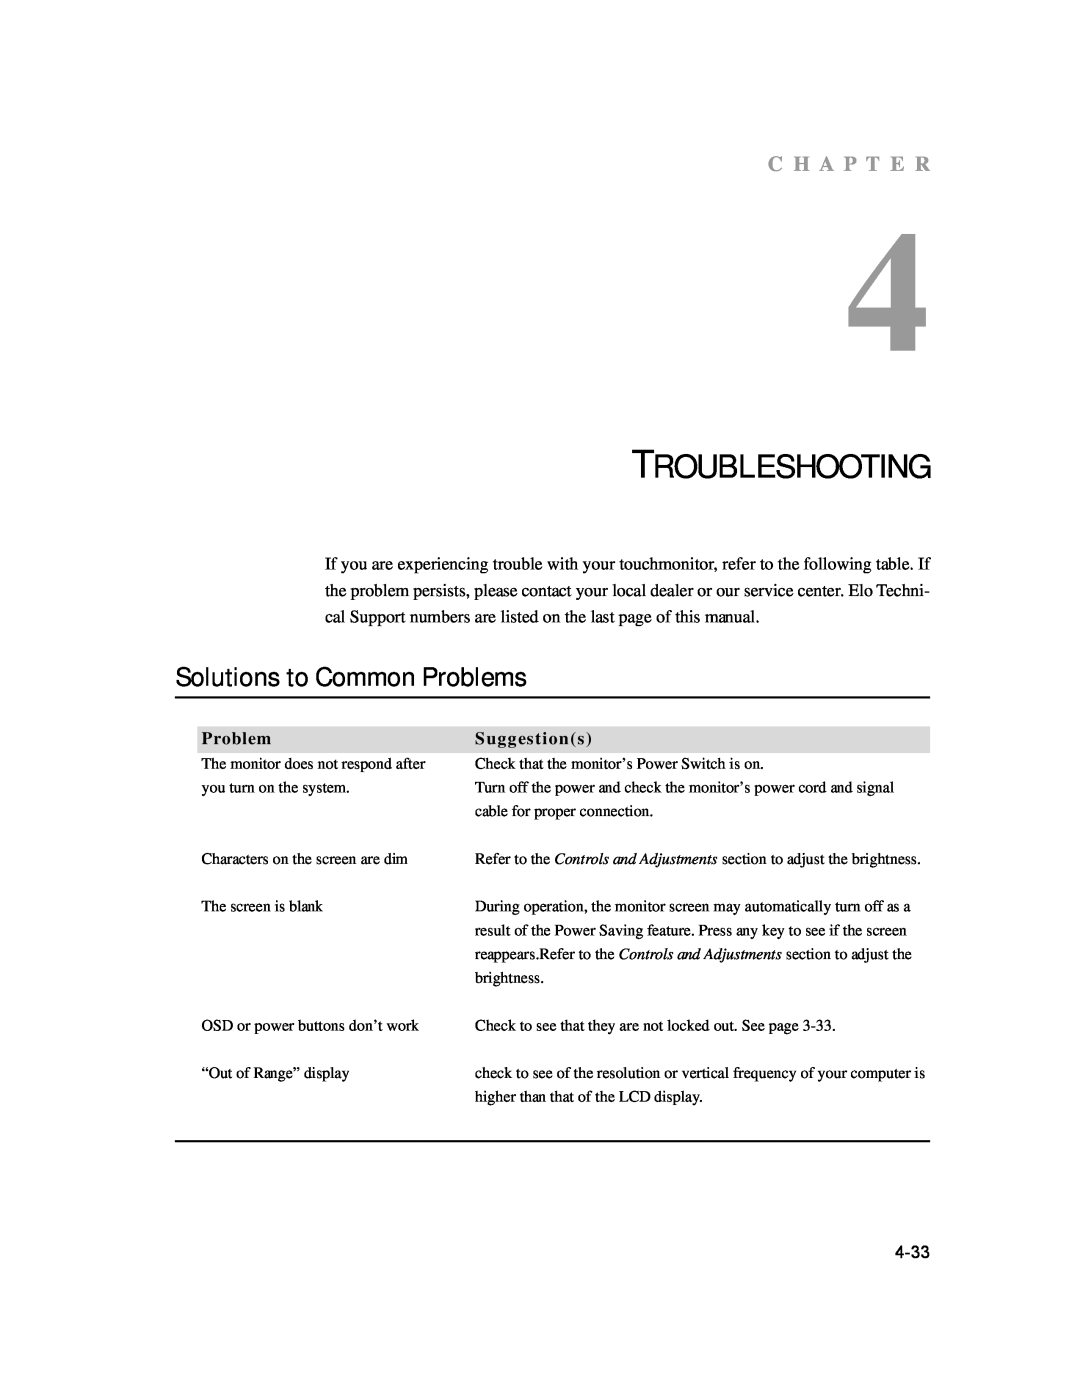 Elo TouchSystems 1729L manual Troubleshooting, Solutions to Common Problems, C H A P T E R, Suggestions, 4-33 